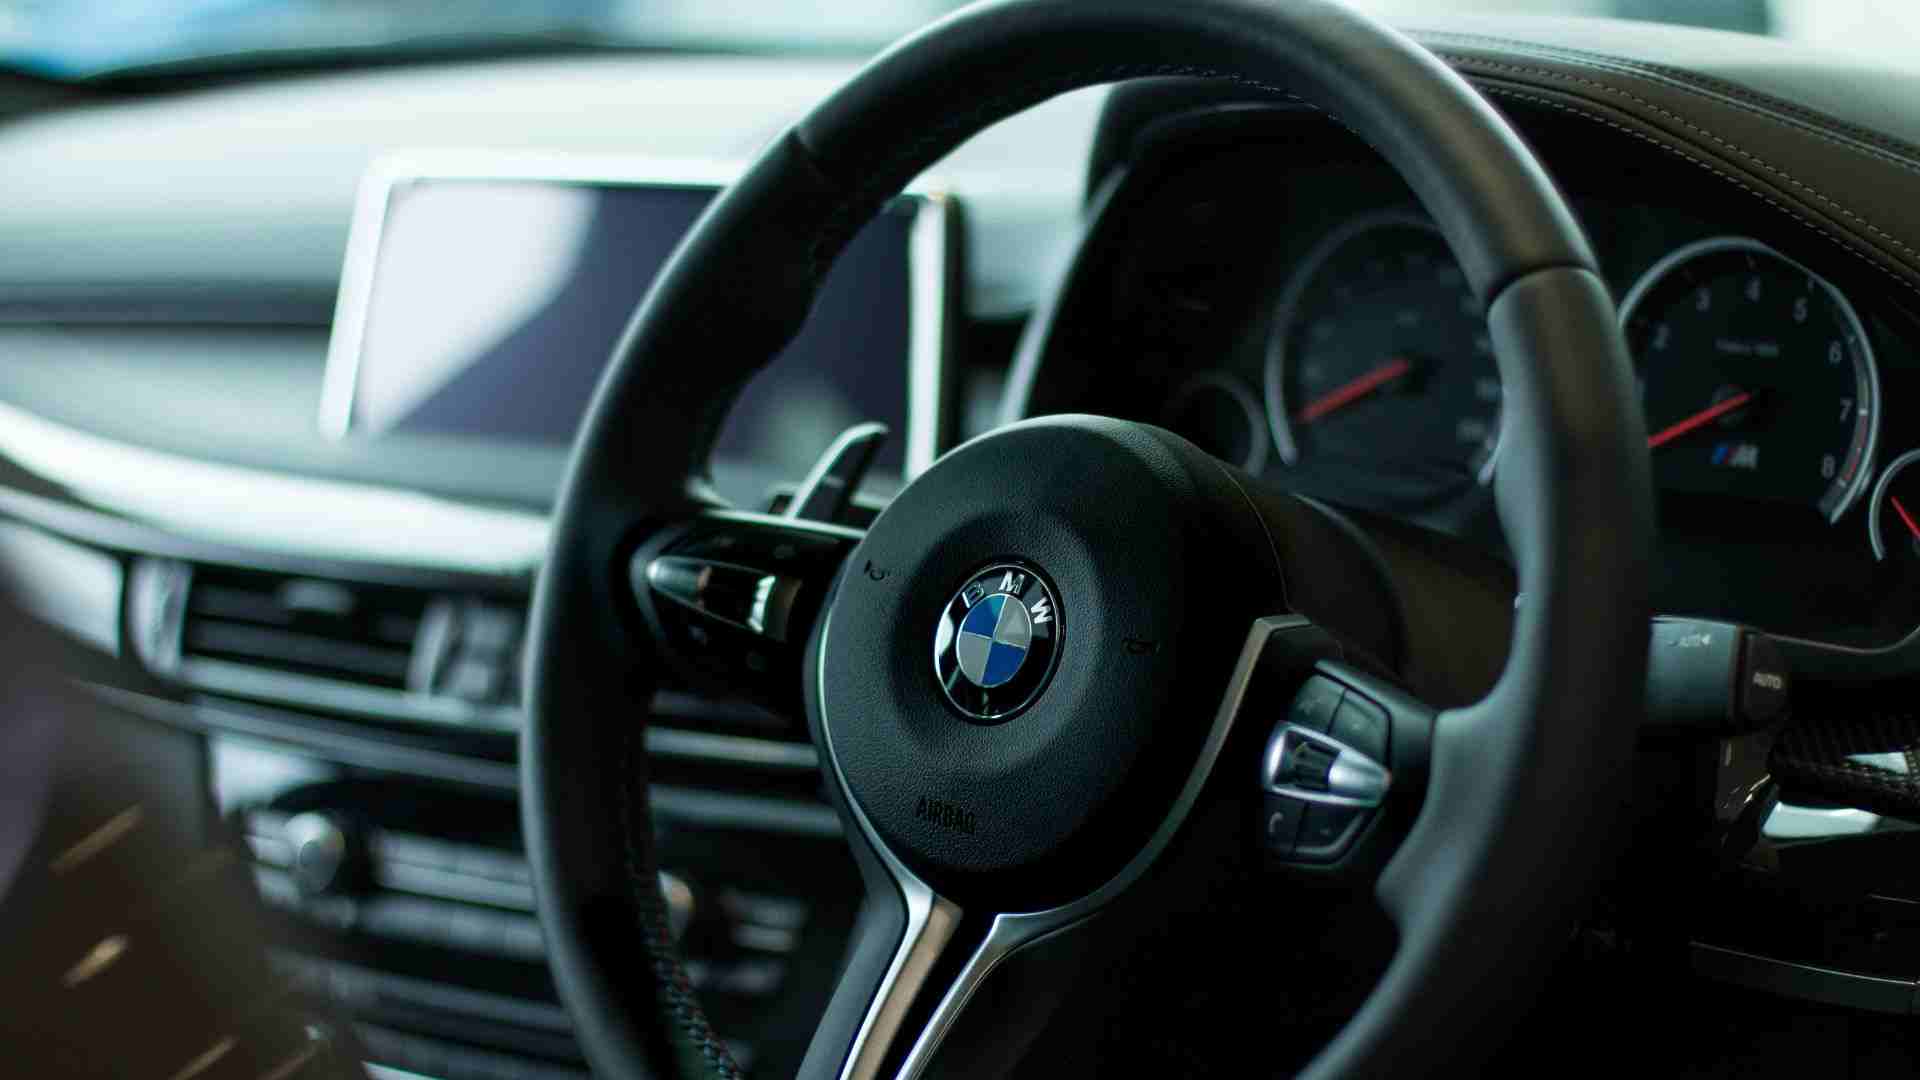 How to Use steering wheel cleaner? Tips to Use and Buy